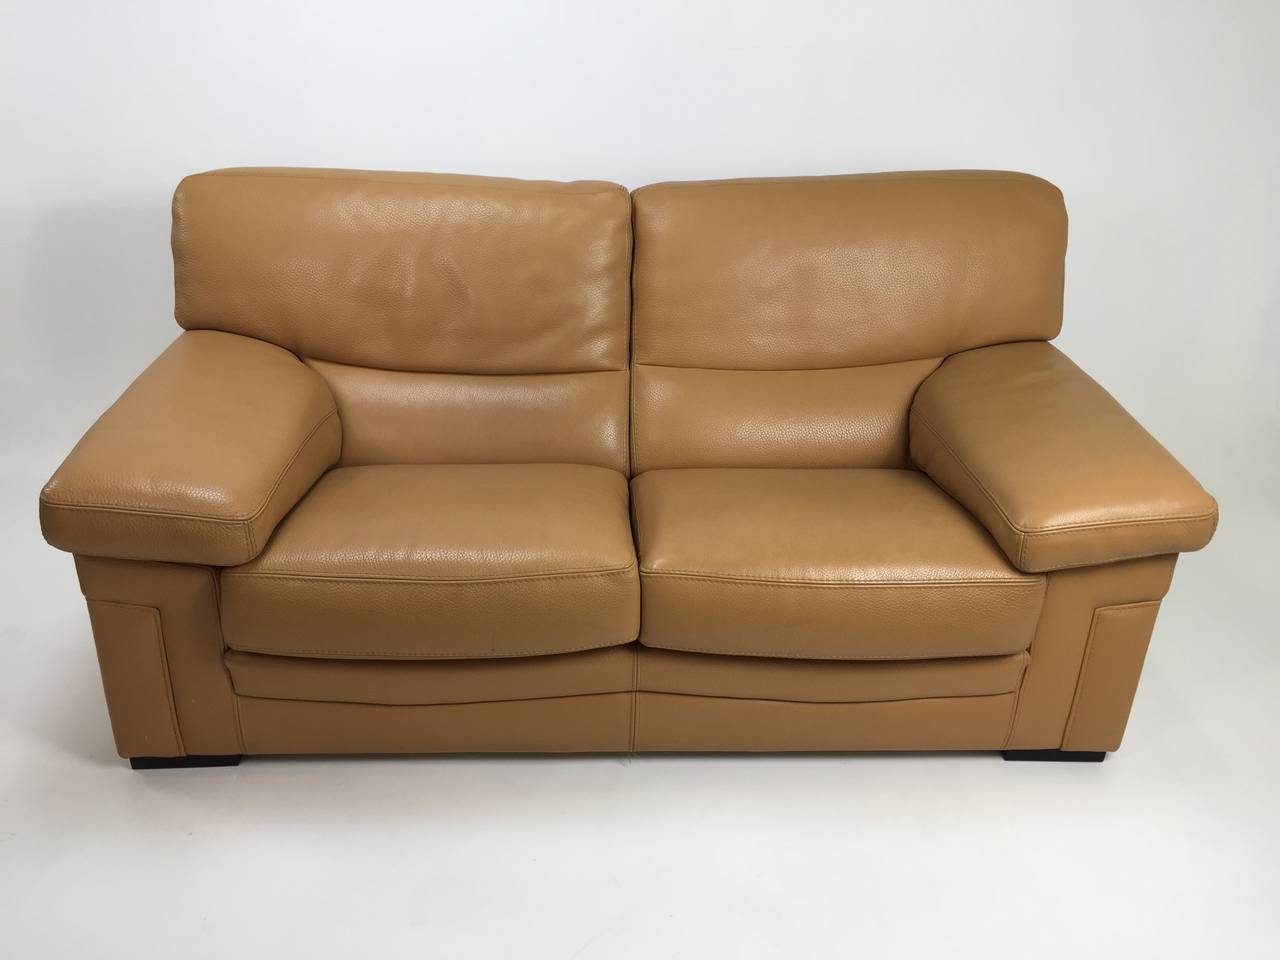 Butter soft 3mm thick full grain caramel leather make this pair of Roche Bobois sofas designed by Hans Hopfer a lux option.